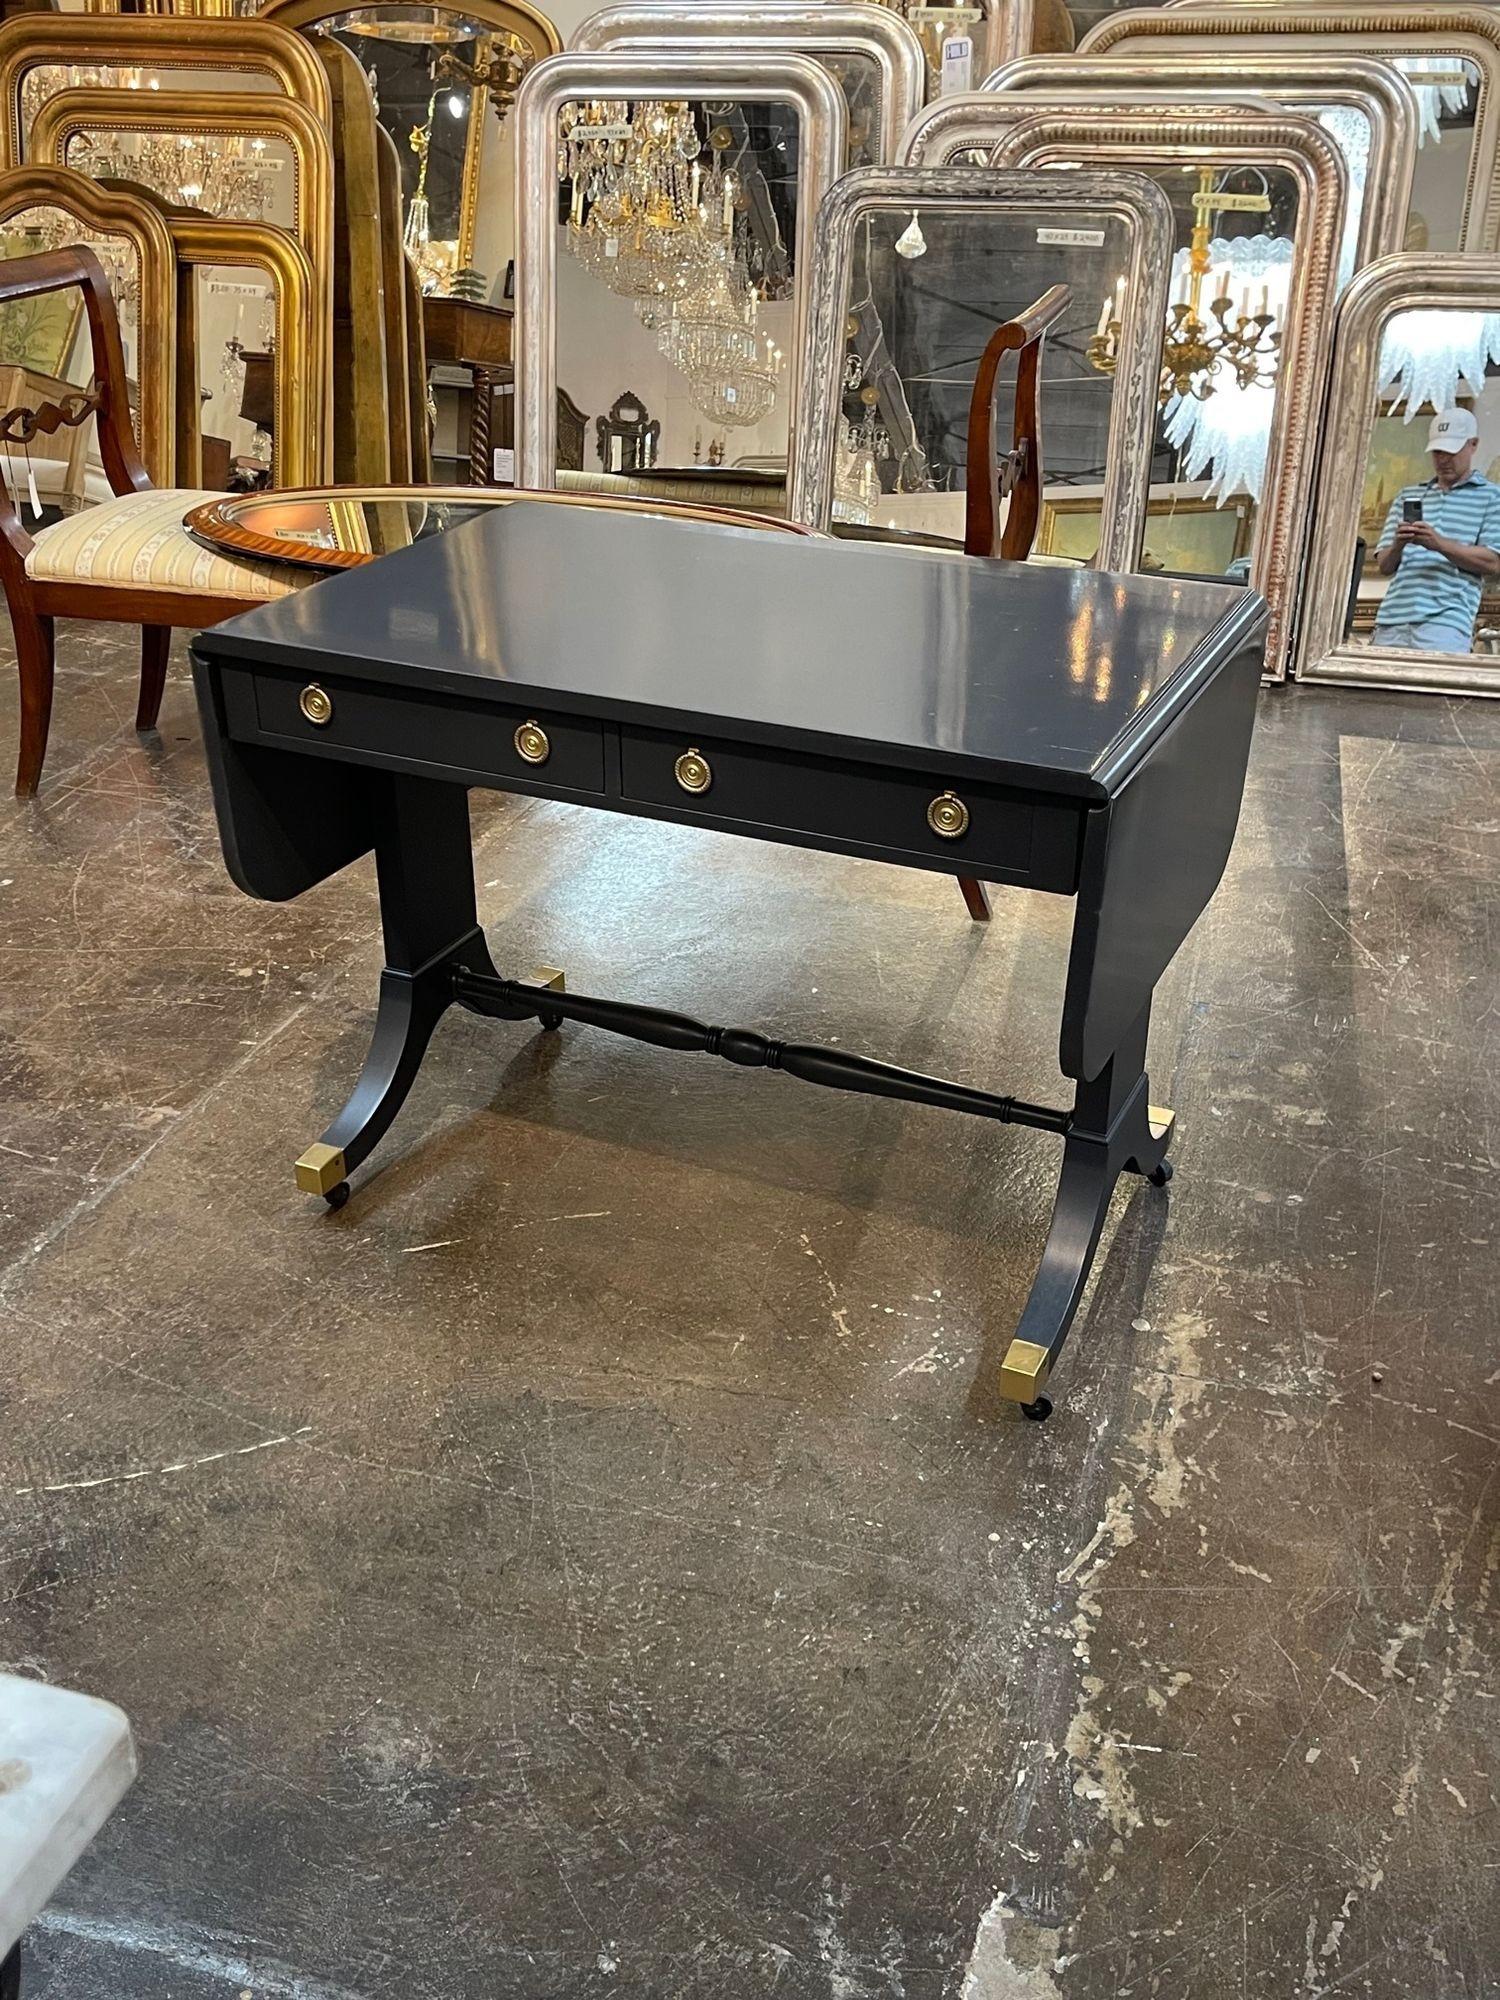 Gorgeous vintage English Regency drop leaf side table. Featuring a beautiful grey lacquered finish. Such an elegant piece!